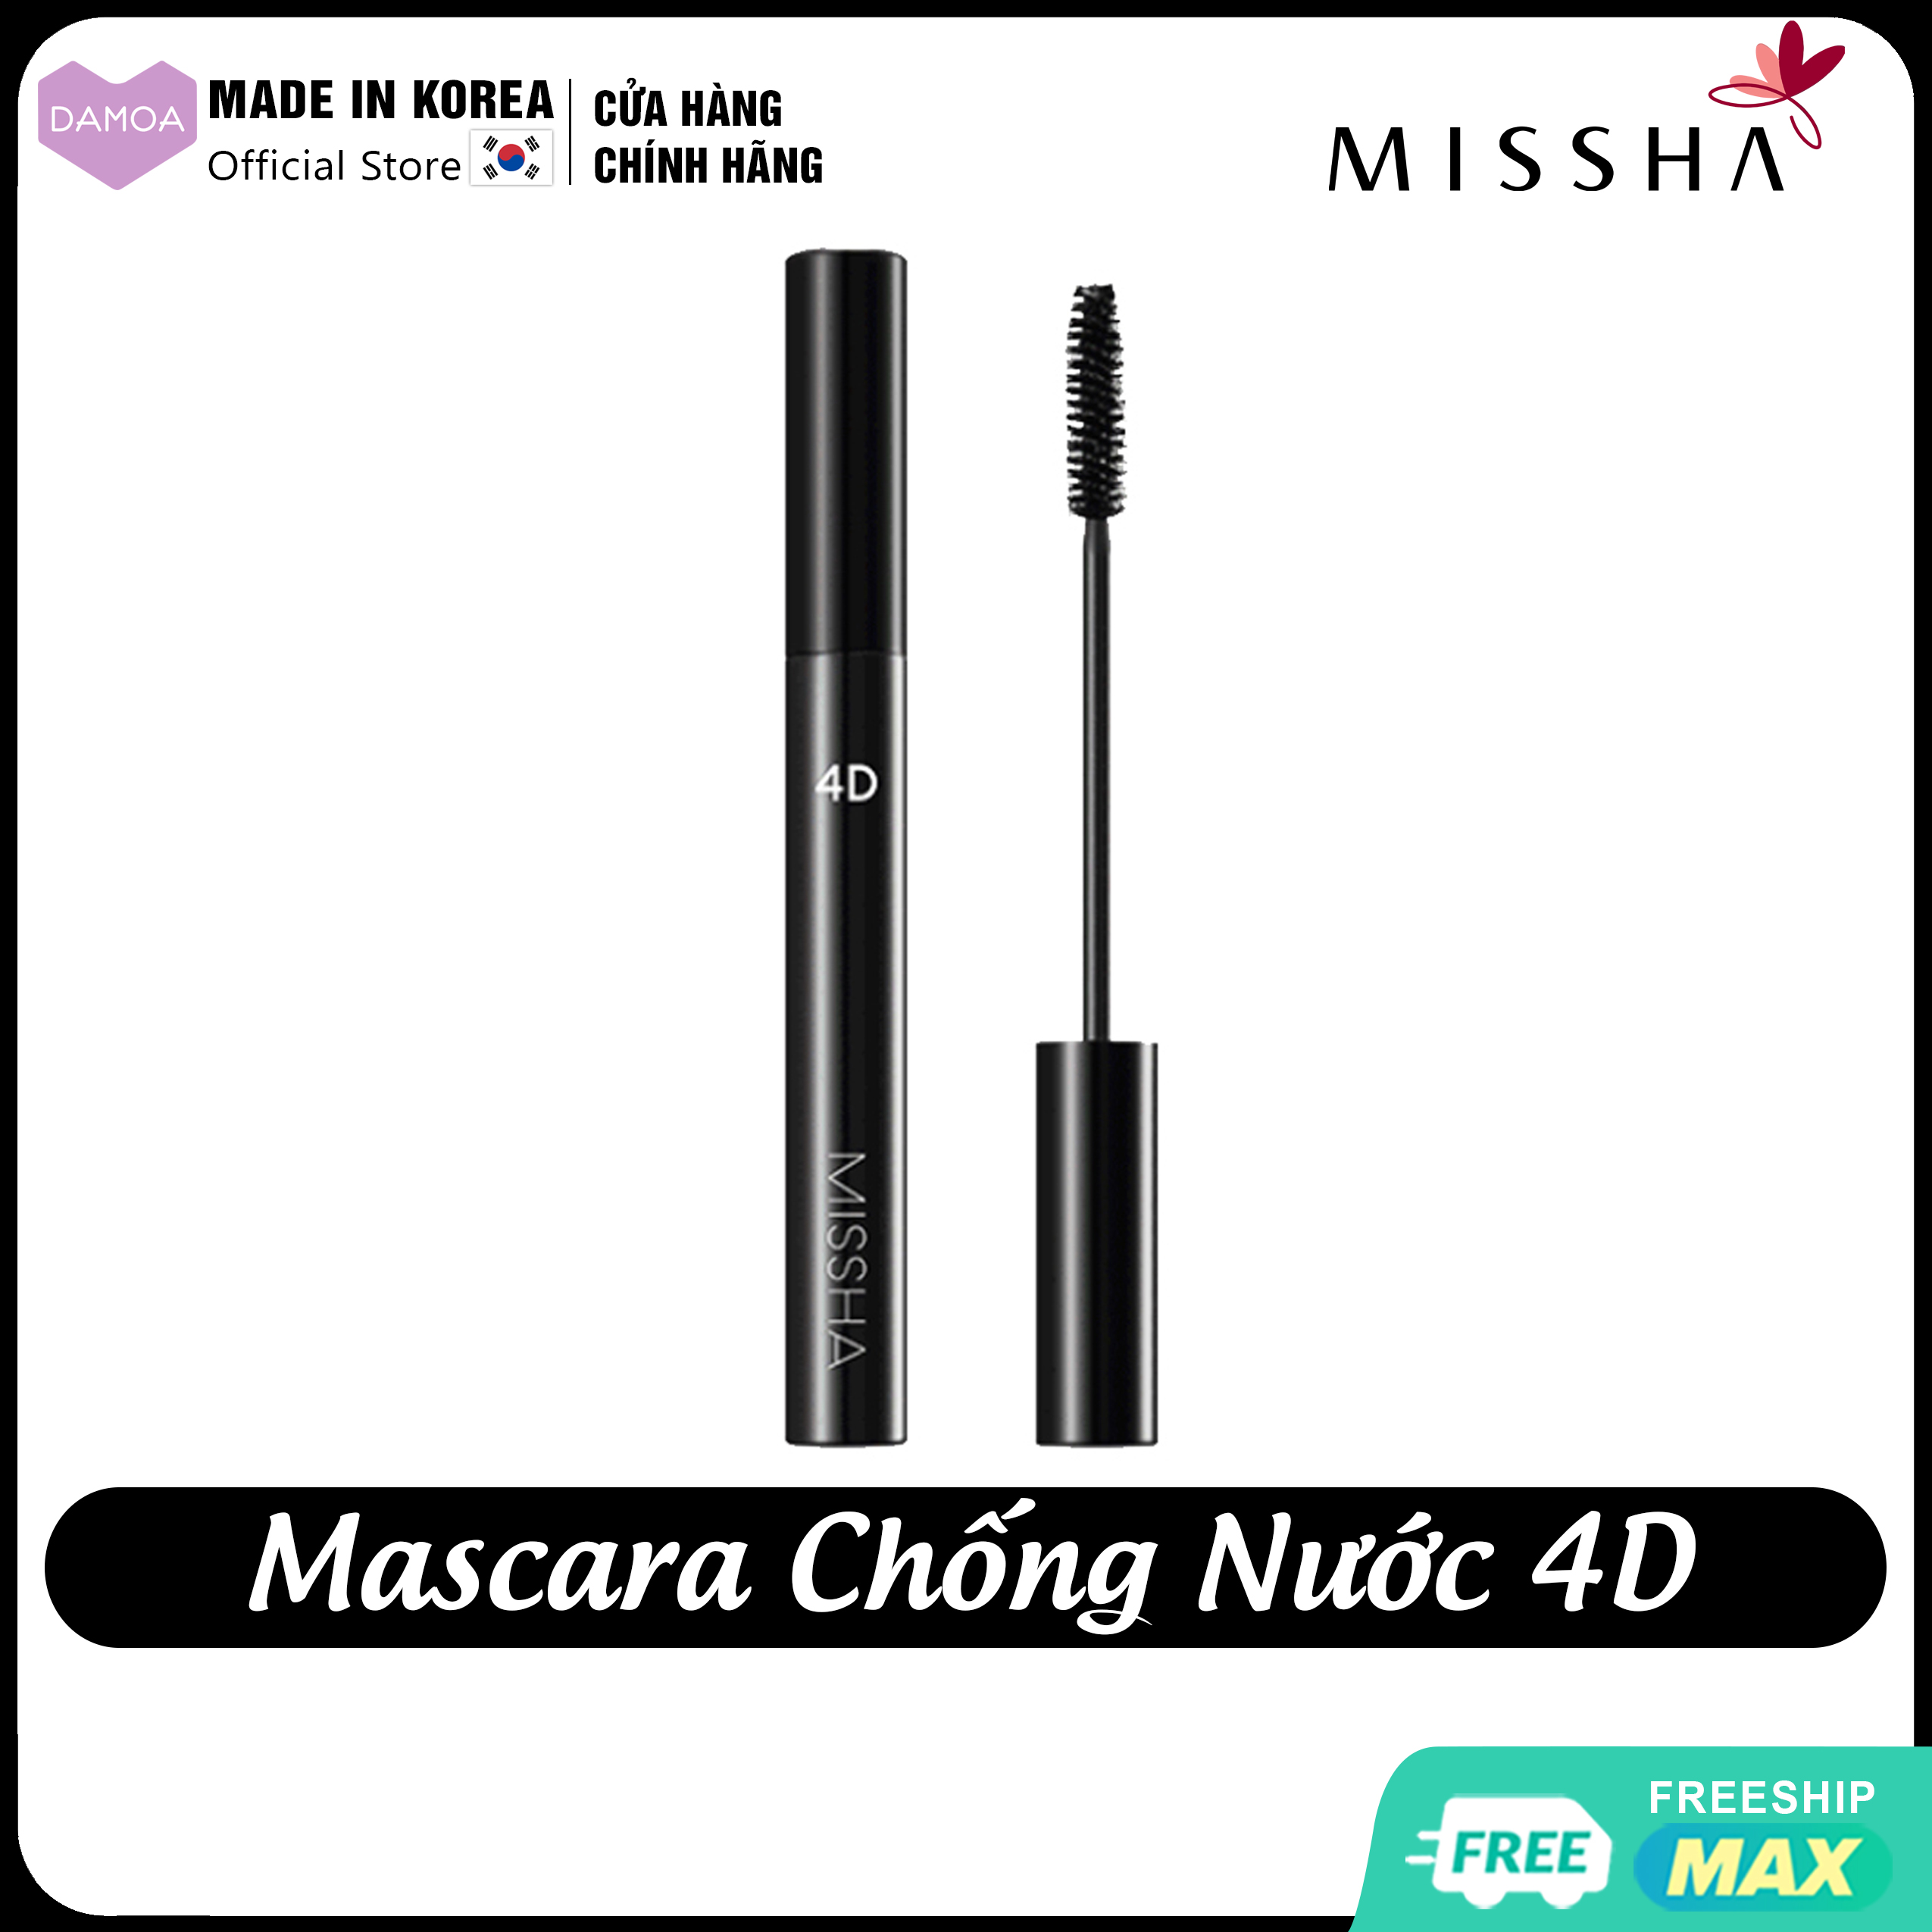 Mascara MISSHA 4D Thick lashes, Waterproof all day long